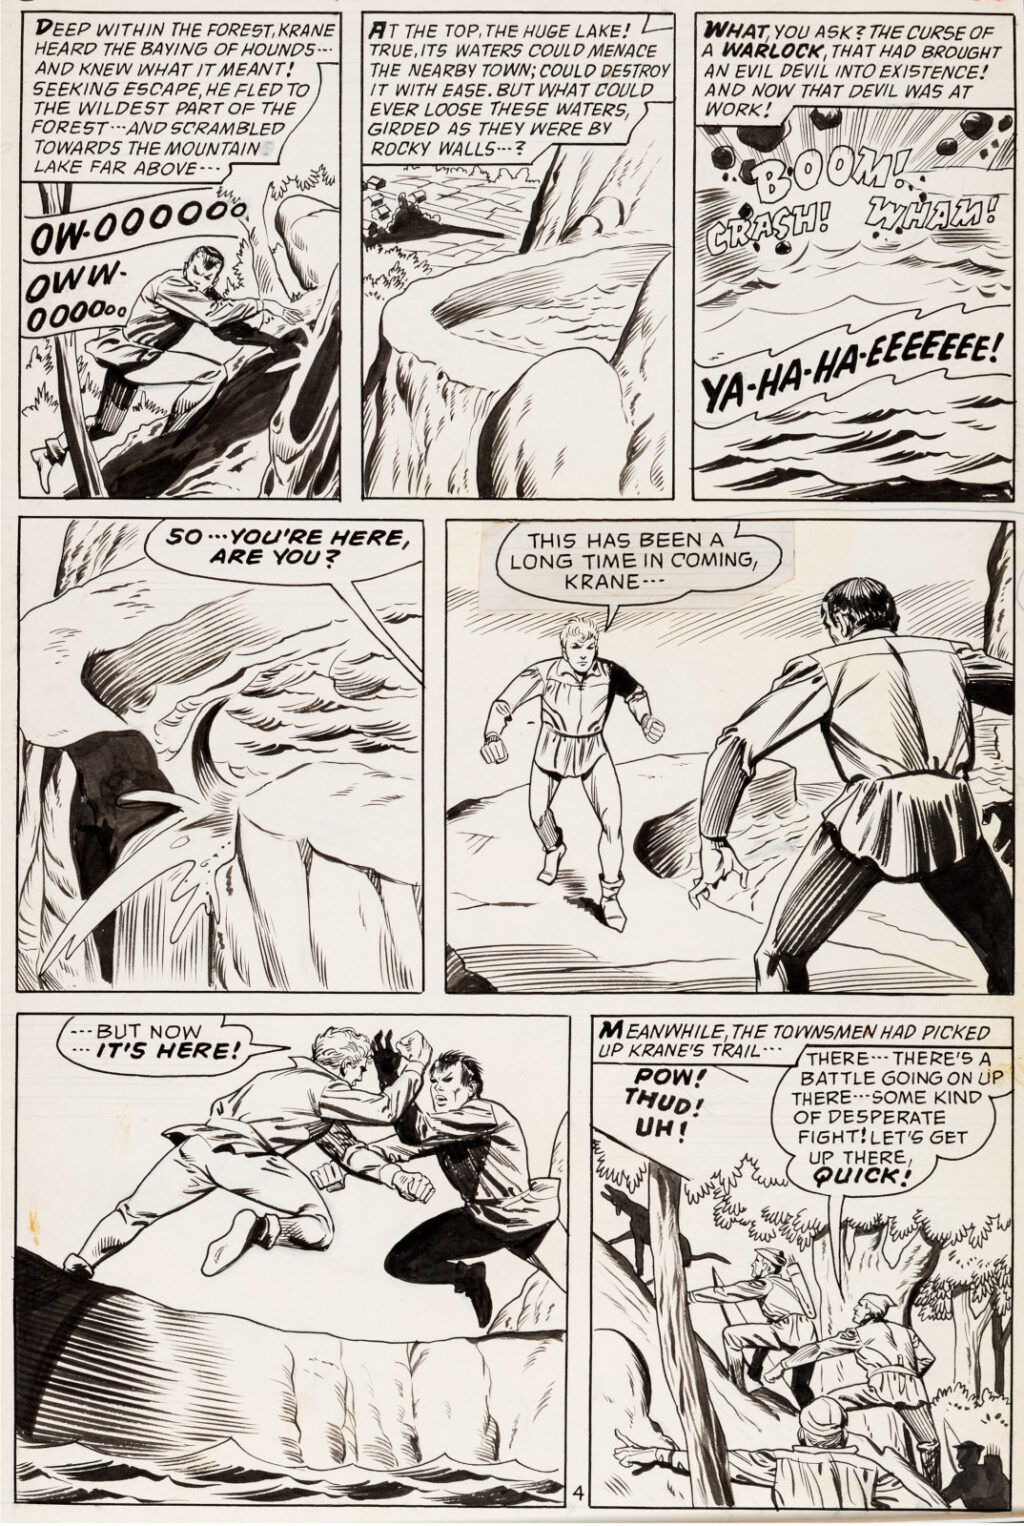 Forbidden Worlds issue 137 page 4 by Steve Ditko and Sal Trapani